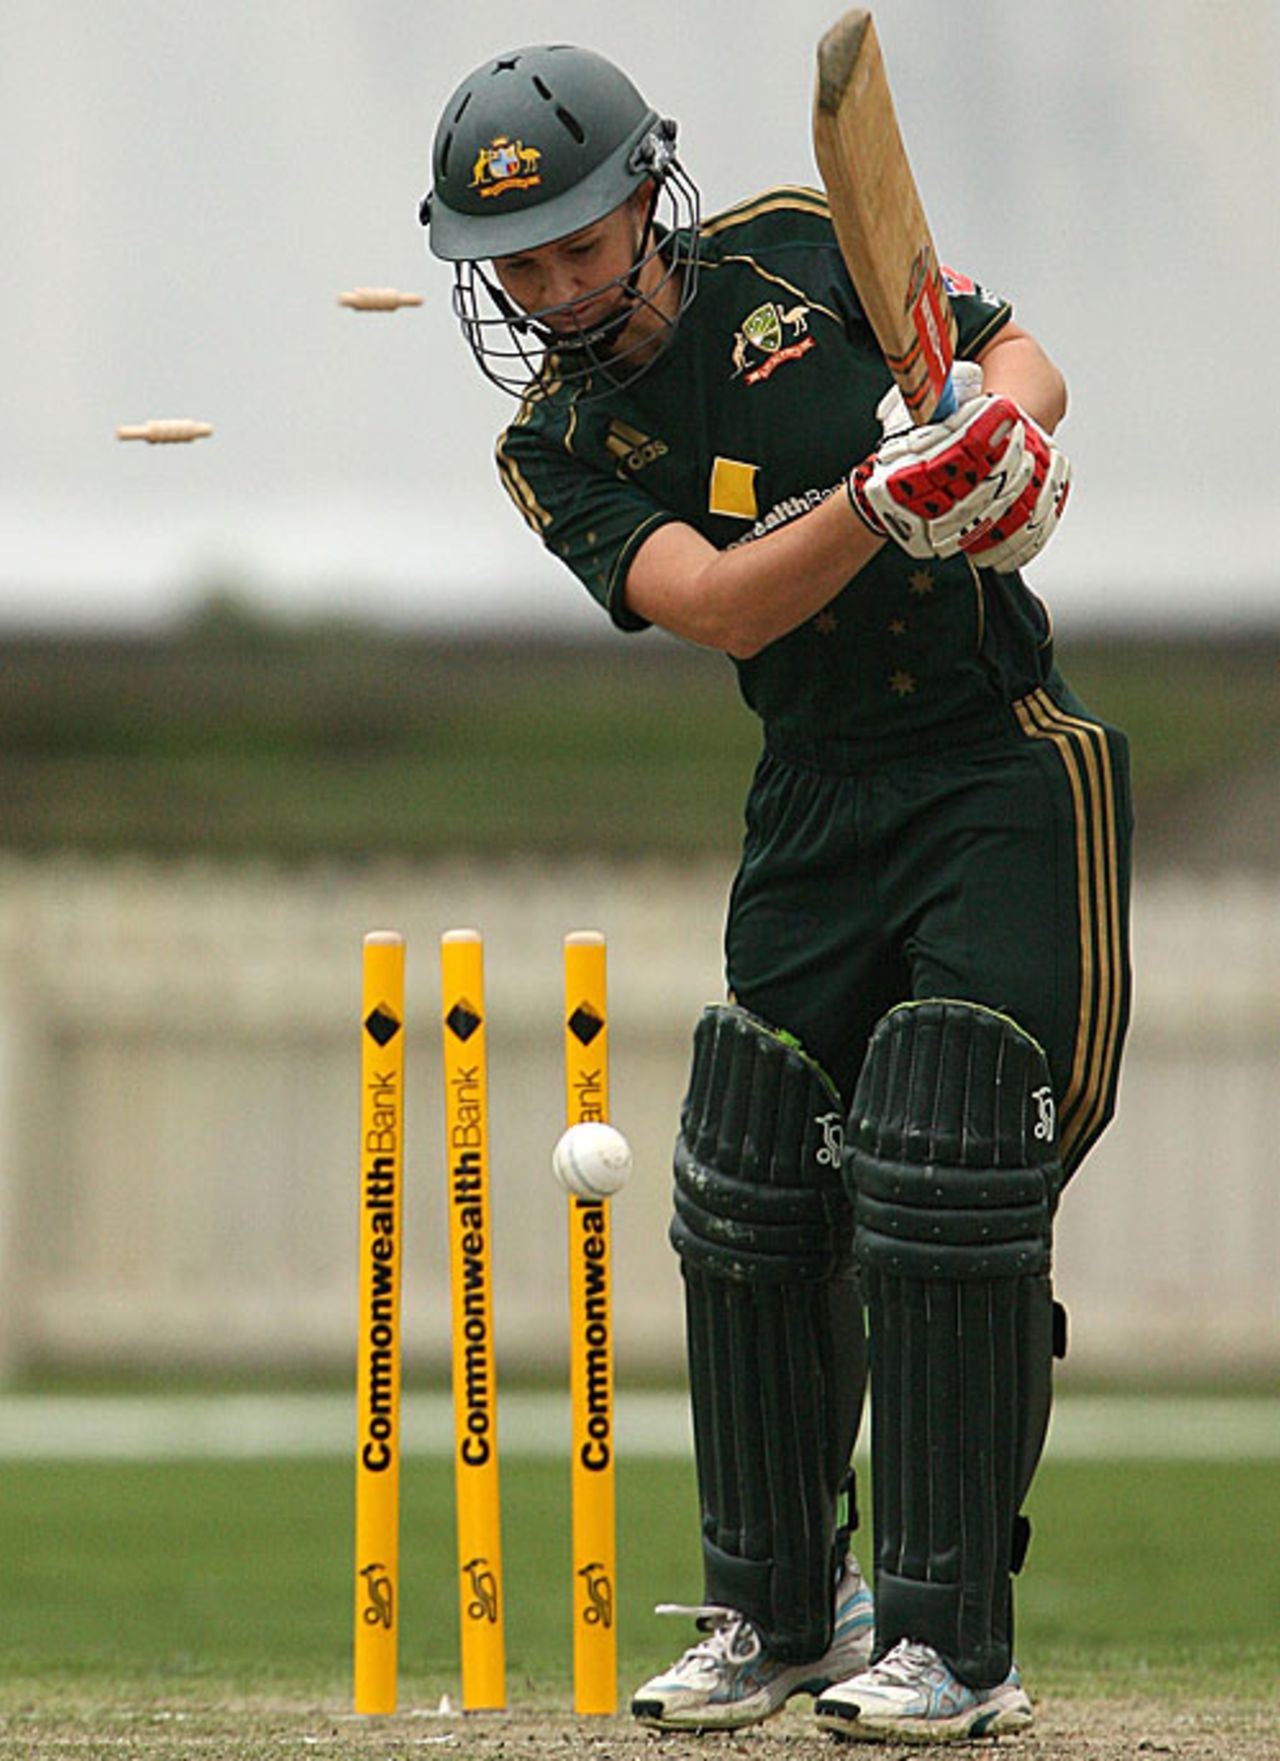 Leah Poulton is bowled for a duck by Kate Pulford, Australia v New Zealand, 3rd women's ODI, Melbourne, February 14, 2010